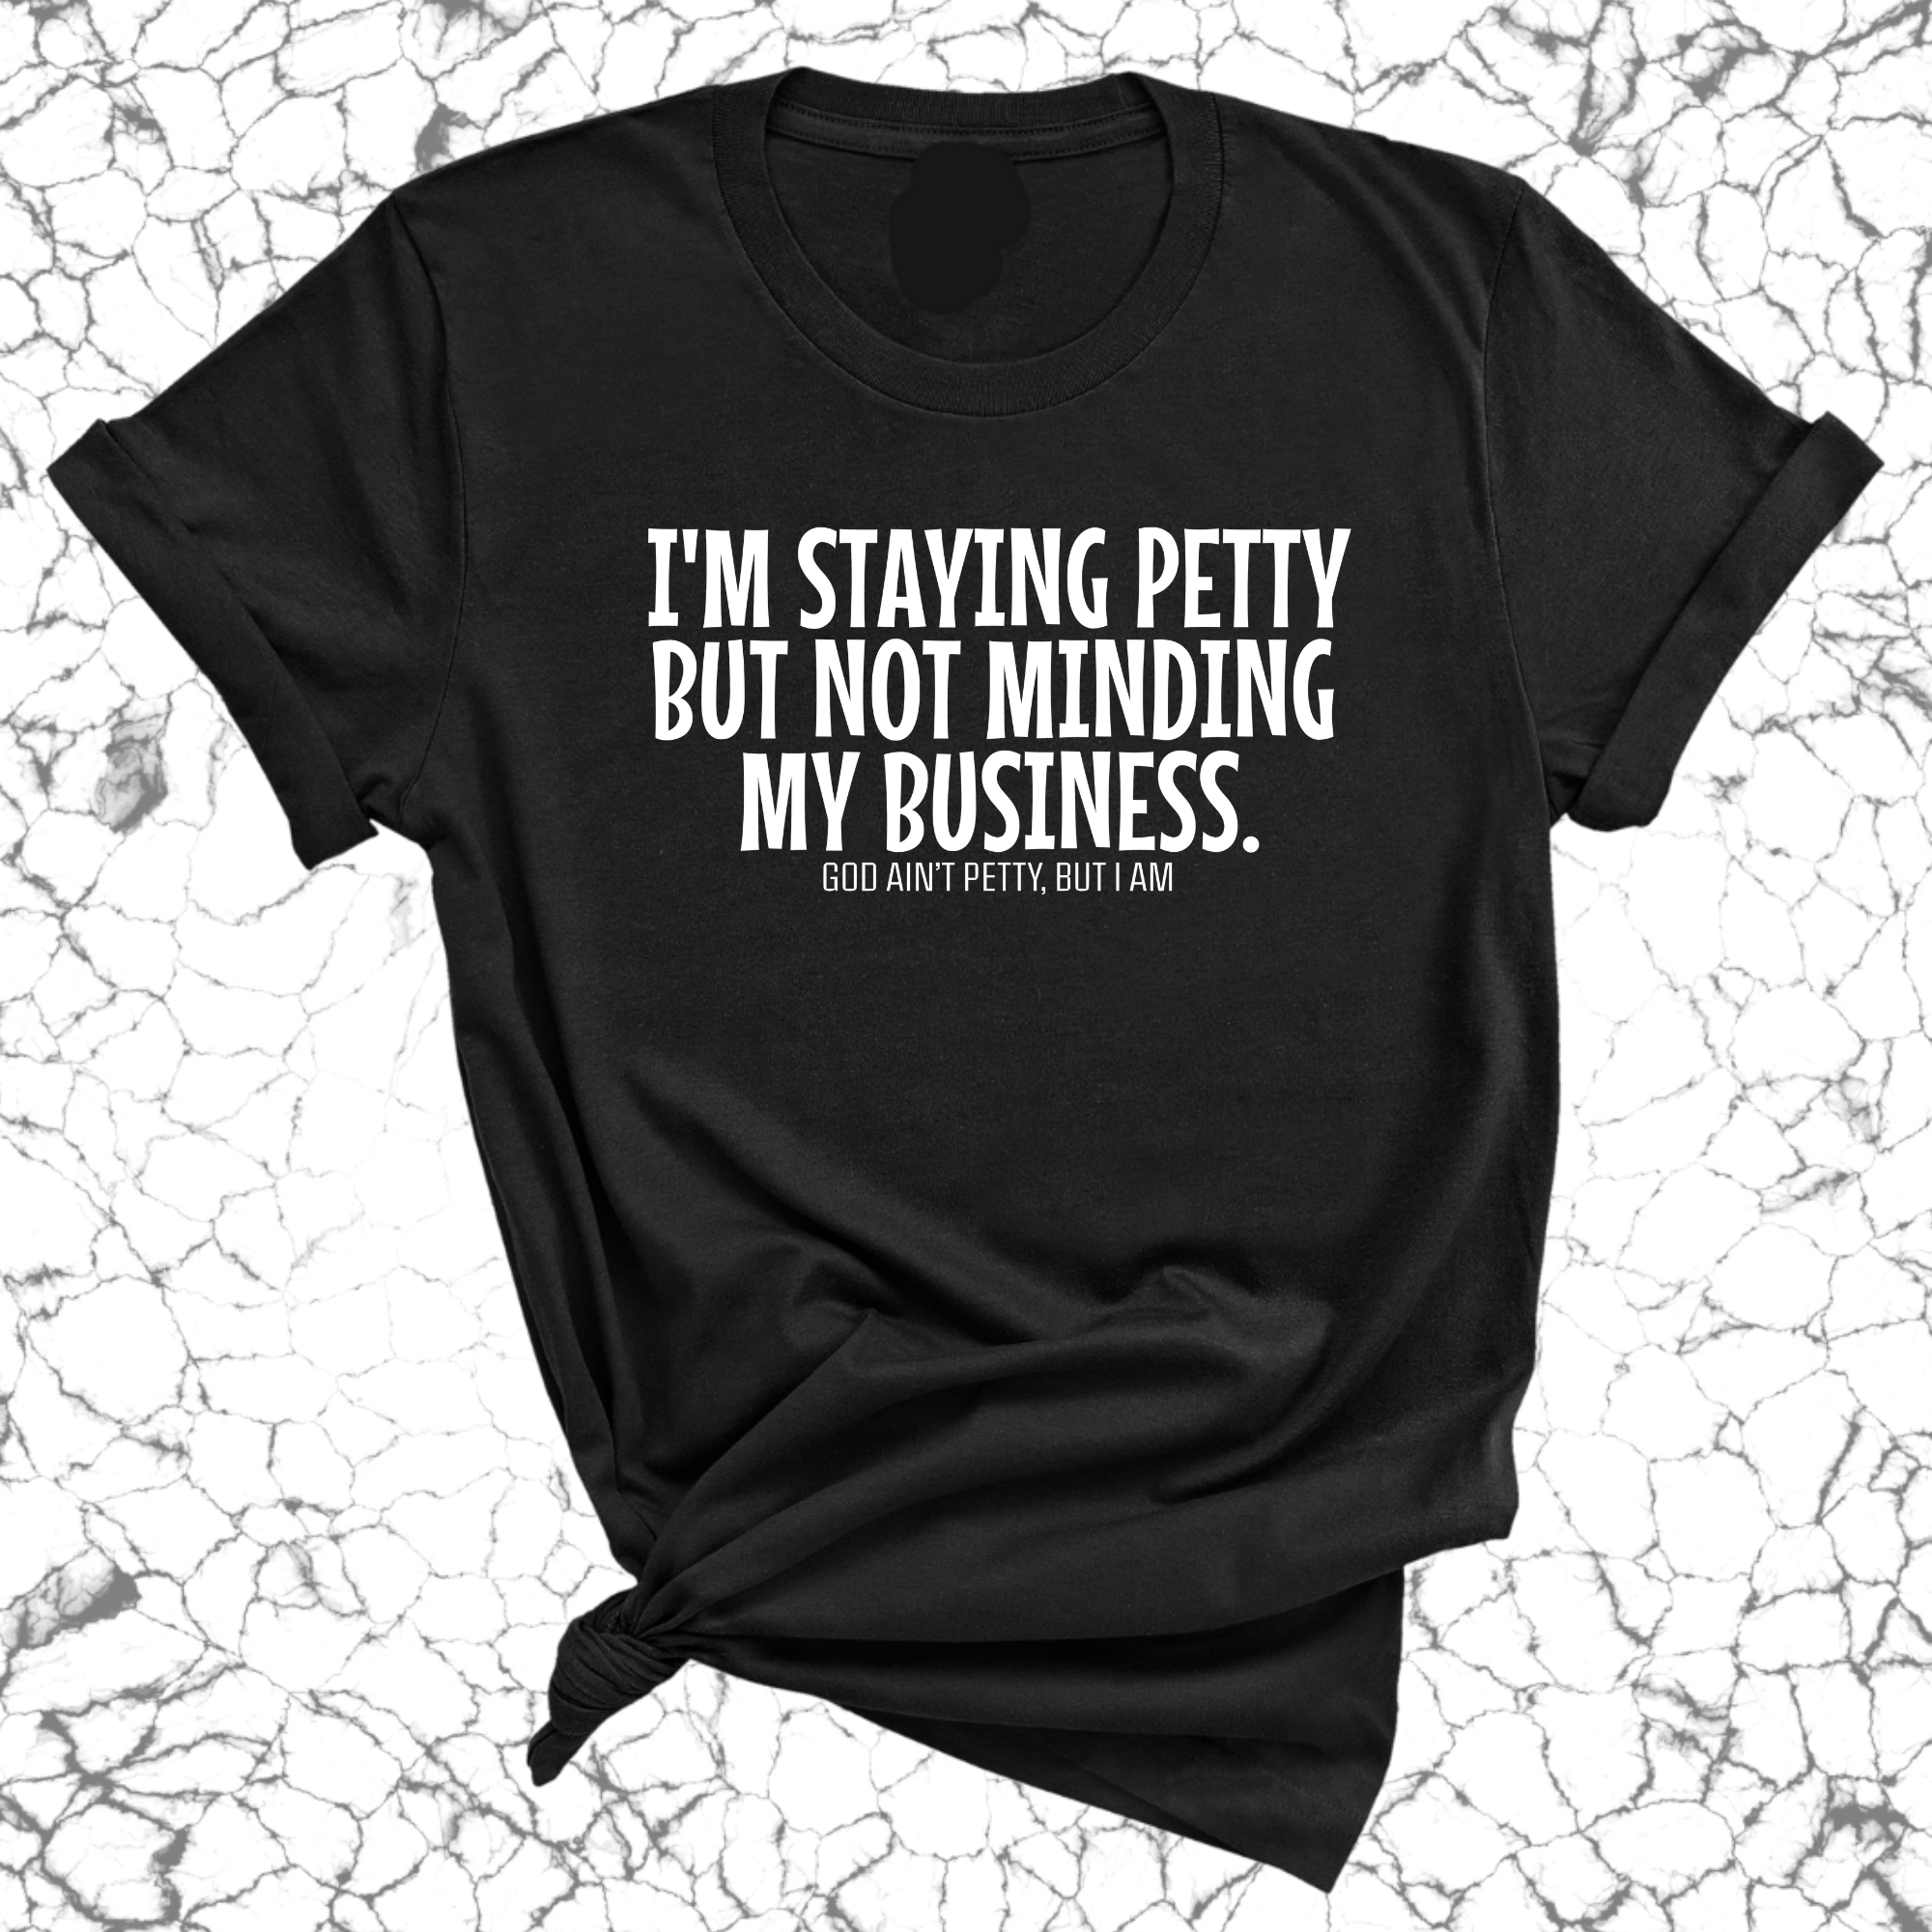 I'm staying petty but not minding my business Unisex Tee-T-Shirt-The Original God Ain't Petty But I Am